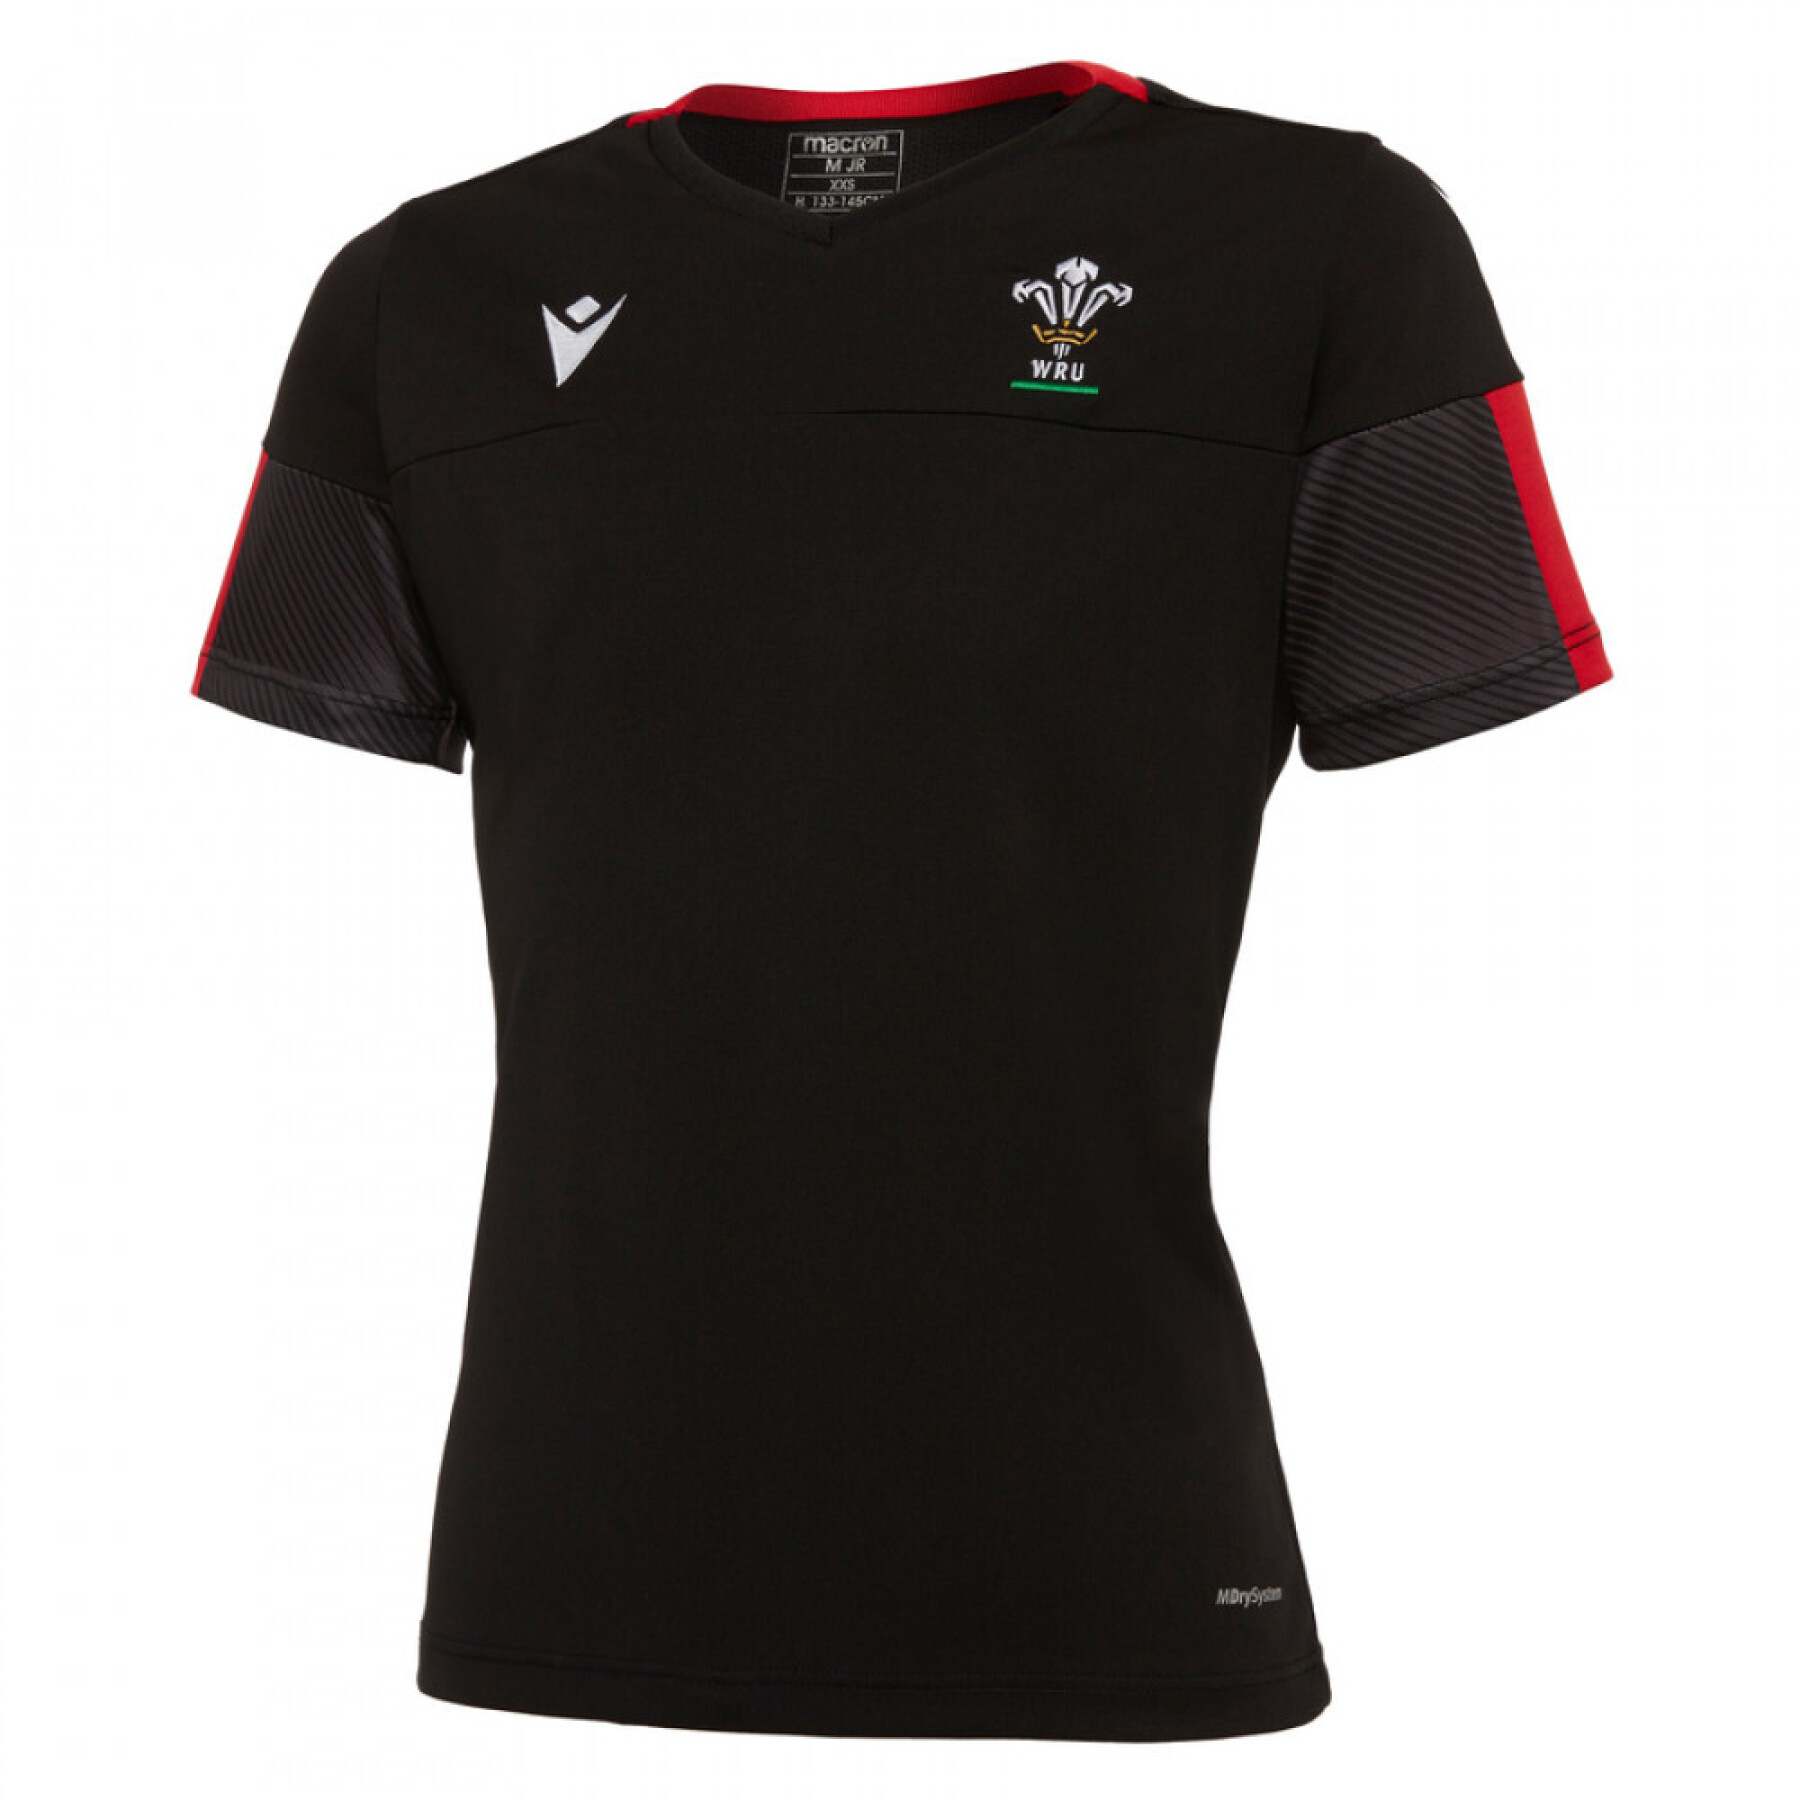 Maillot enfant staff Pays de Galles Rugby XV 2020/21